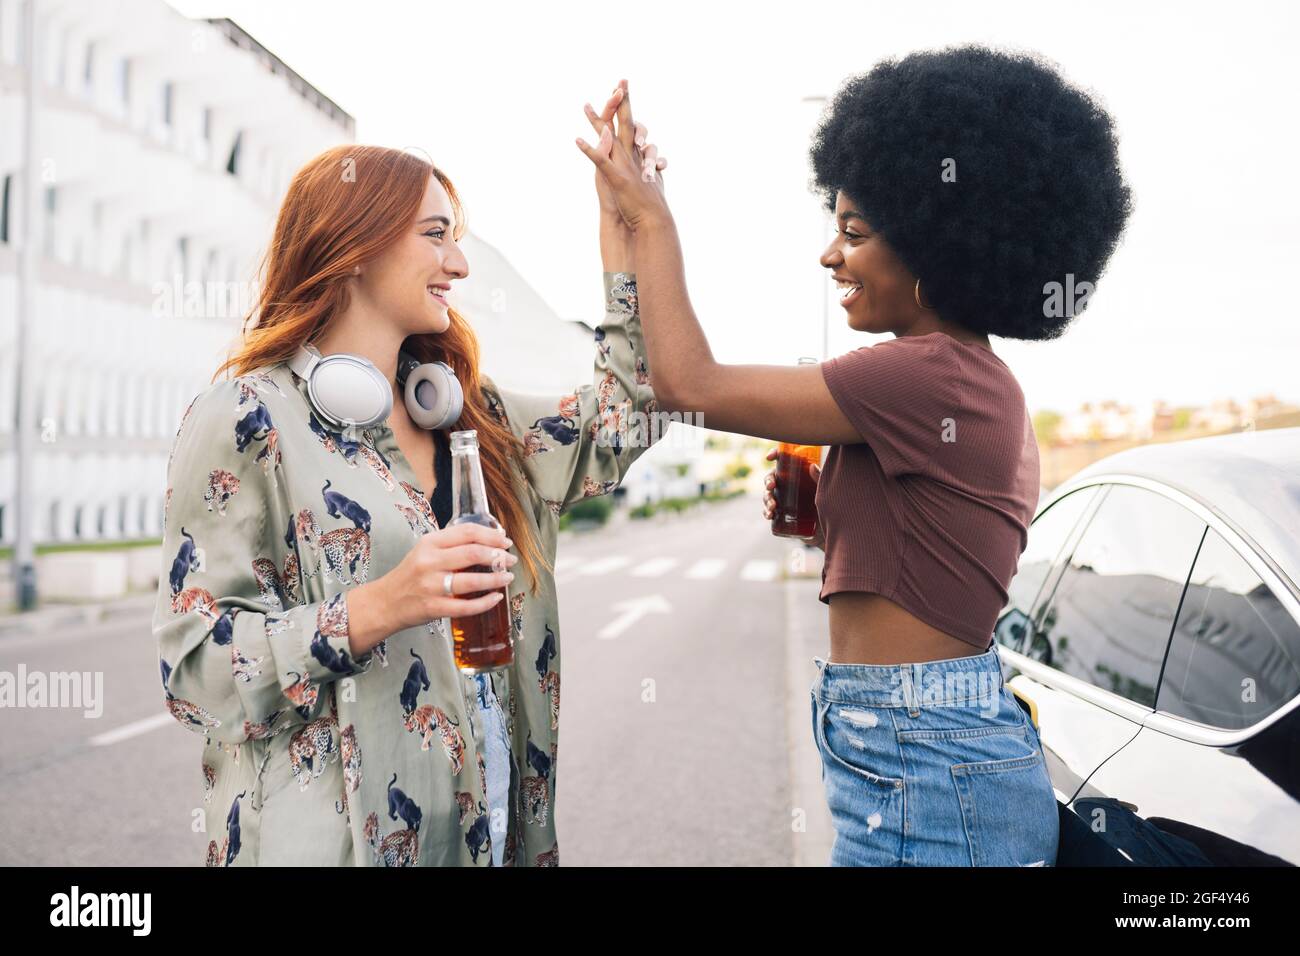 Smiling female friends giving high-five on road Stock Photo